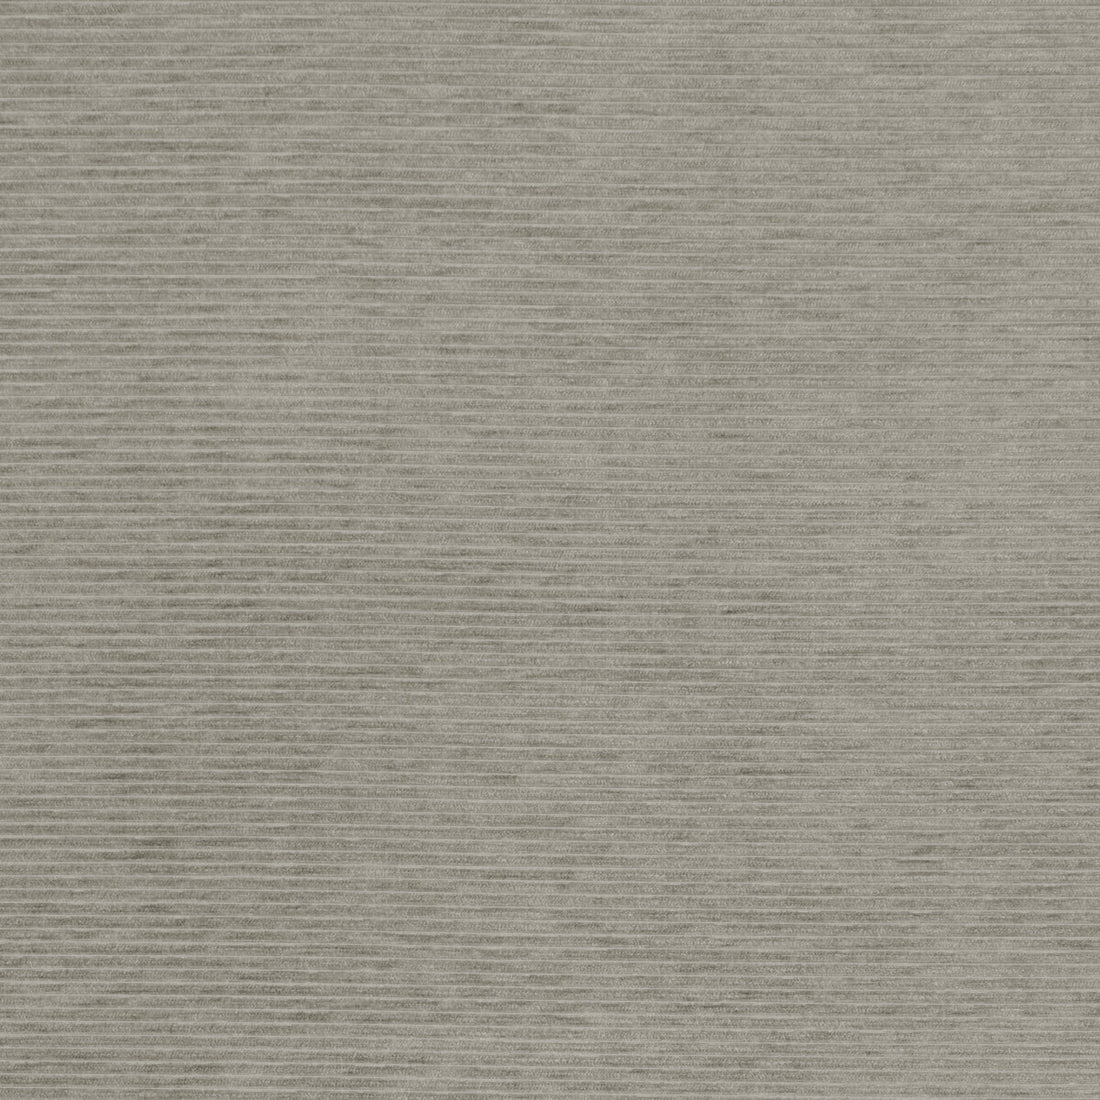 Kravet Smart fabric in 36294-11 color - pattern 36294.11.0 - by Kravet Smart in the Performance Crypton Home collection